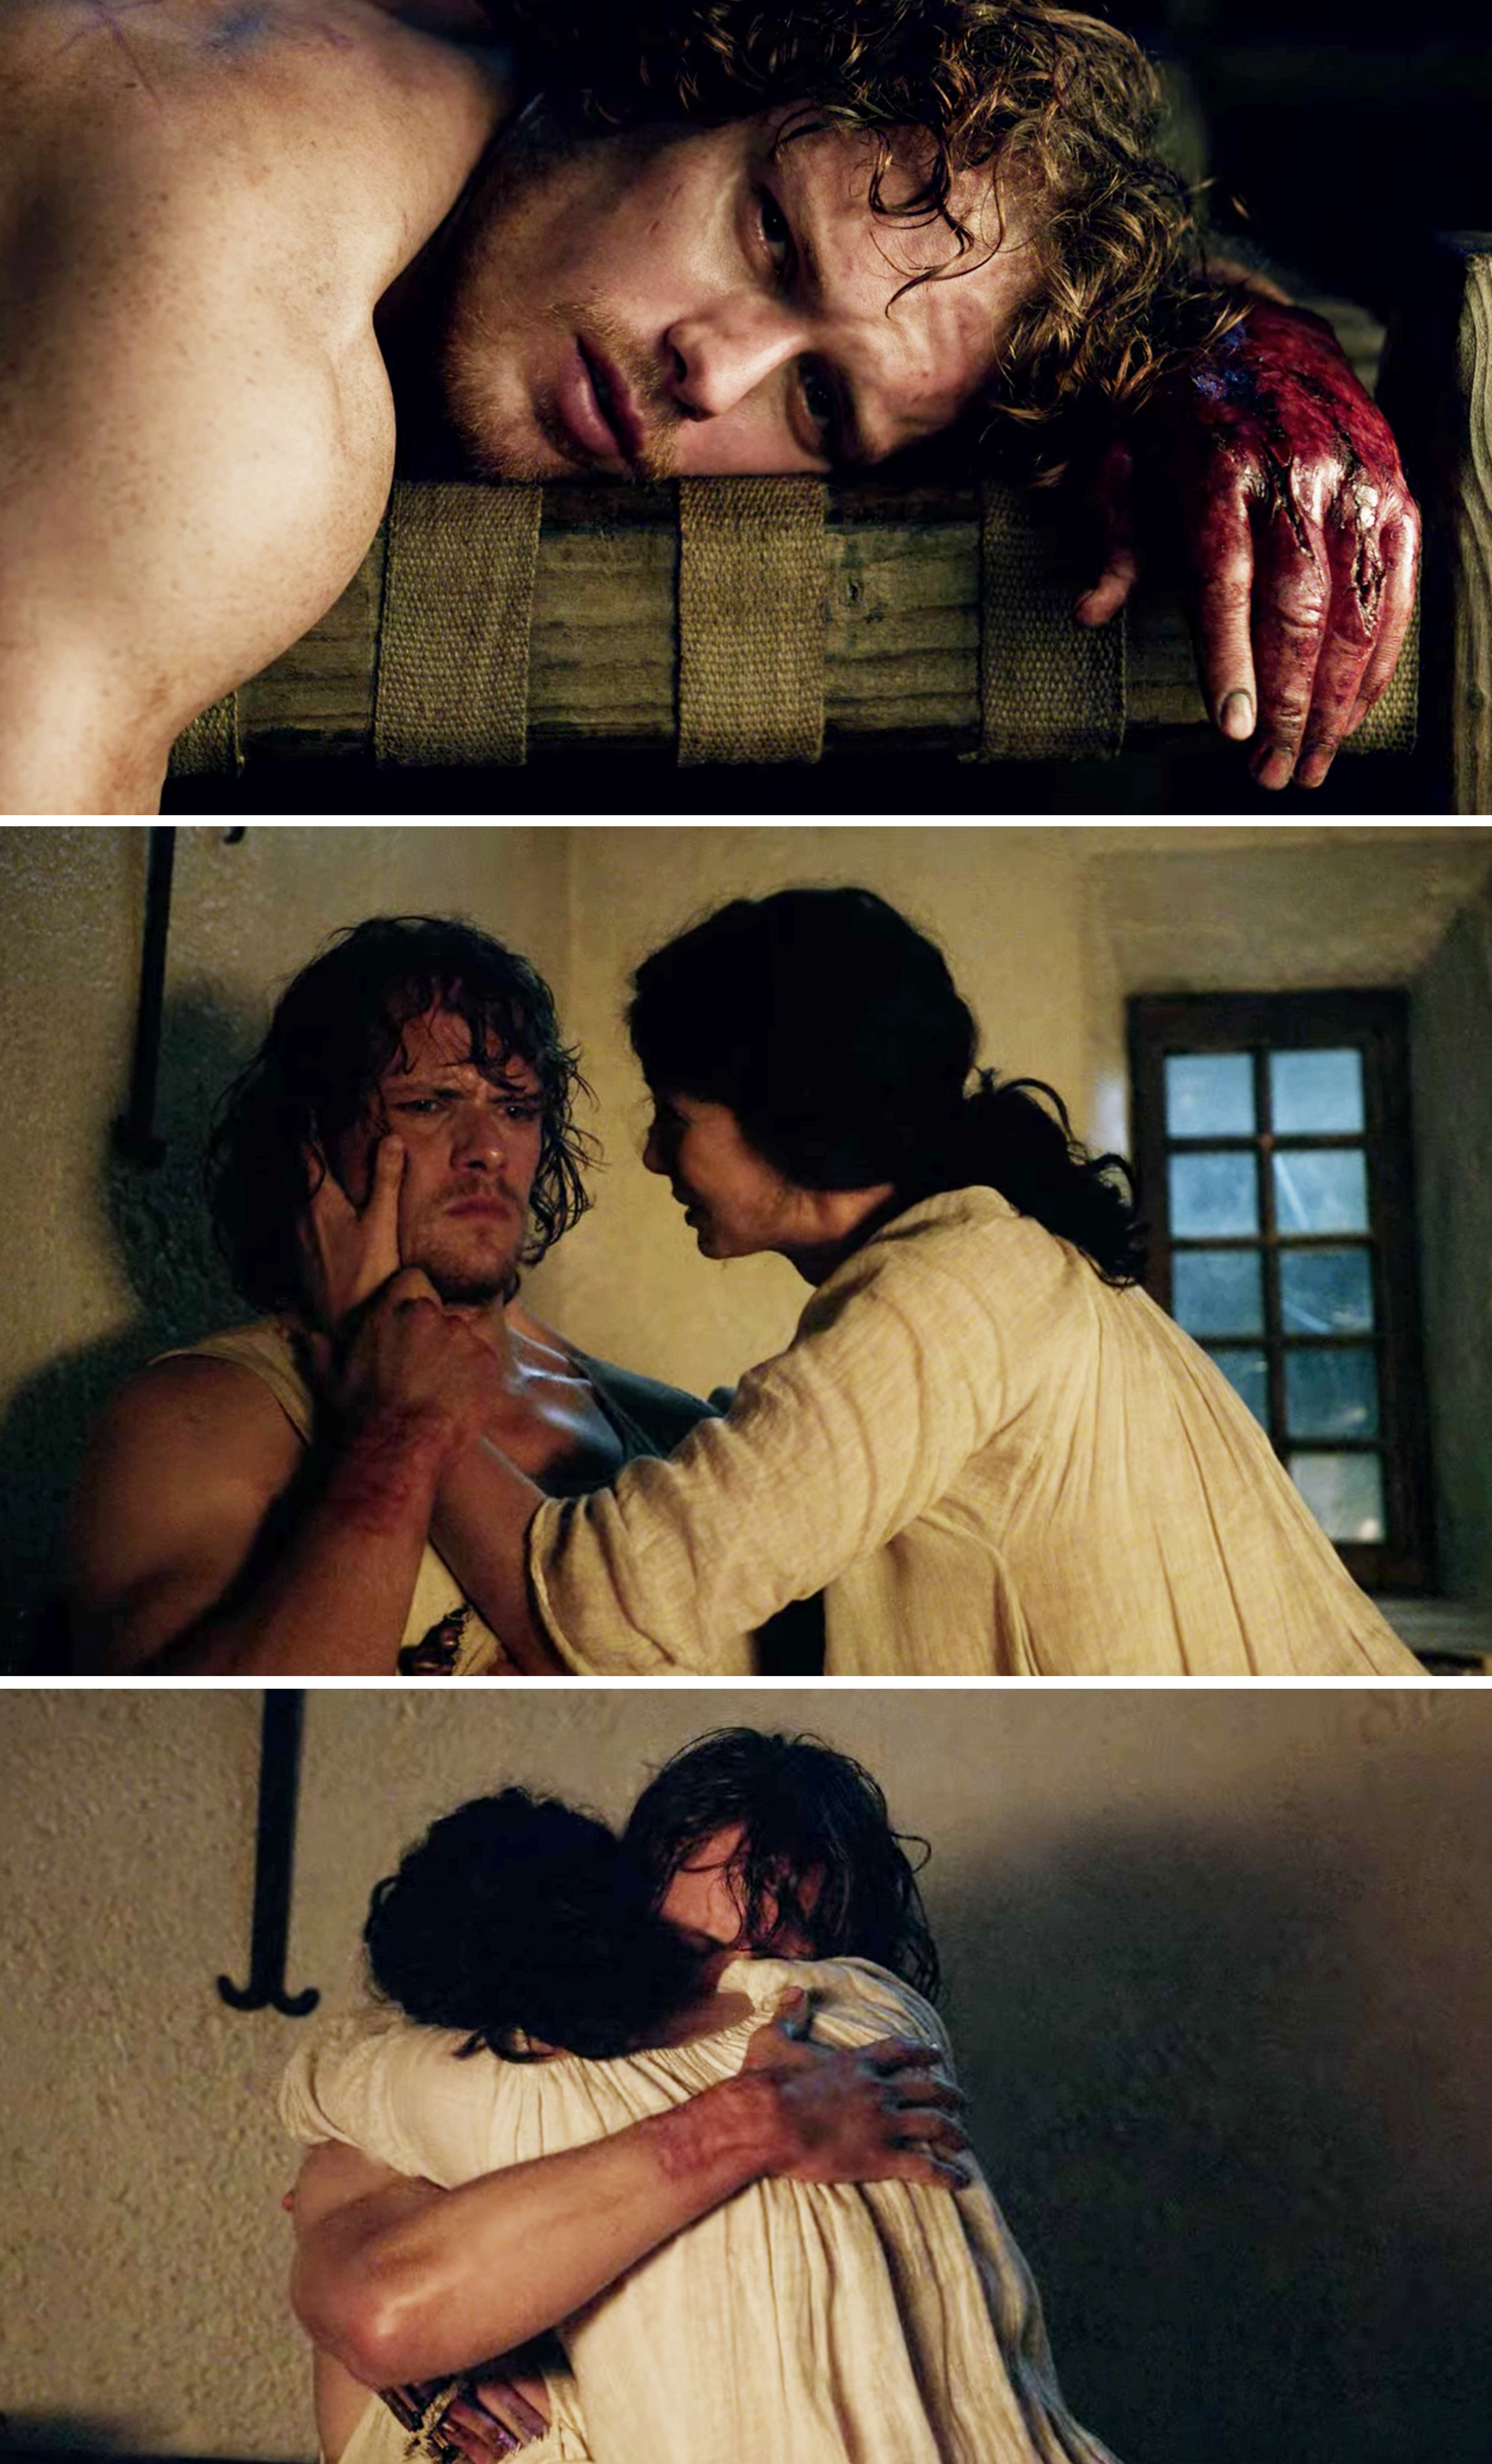 Jamie sobbing and hugging Claire